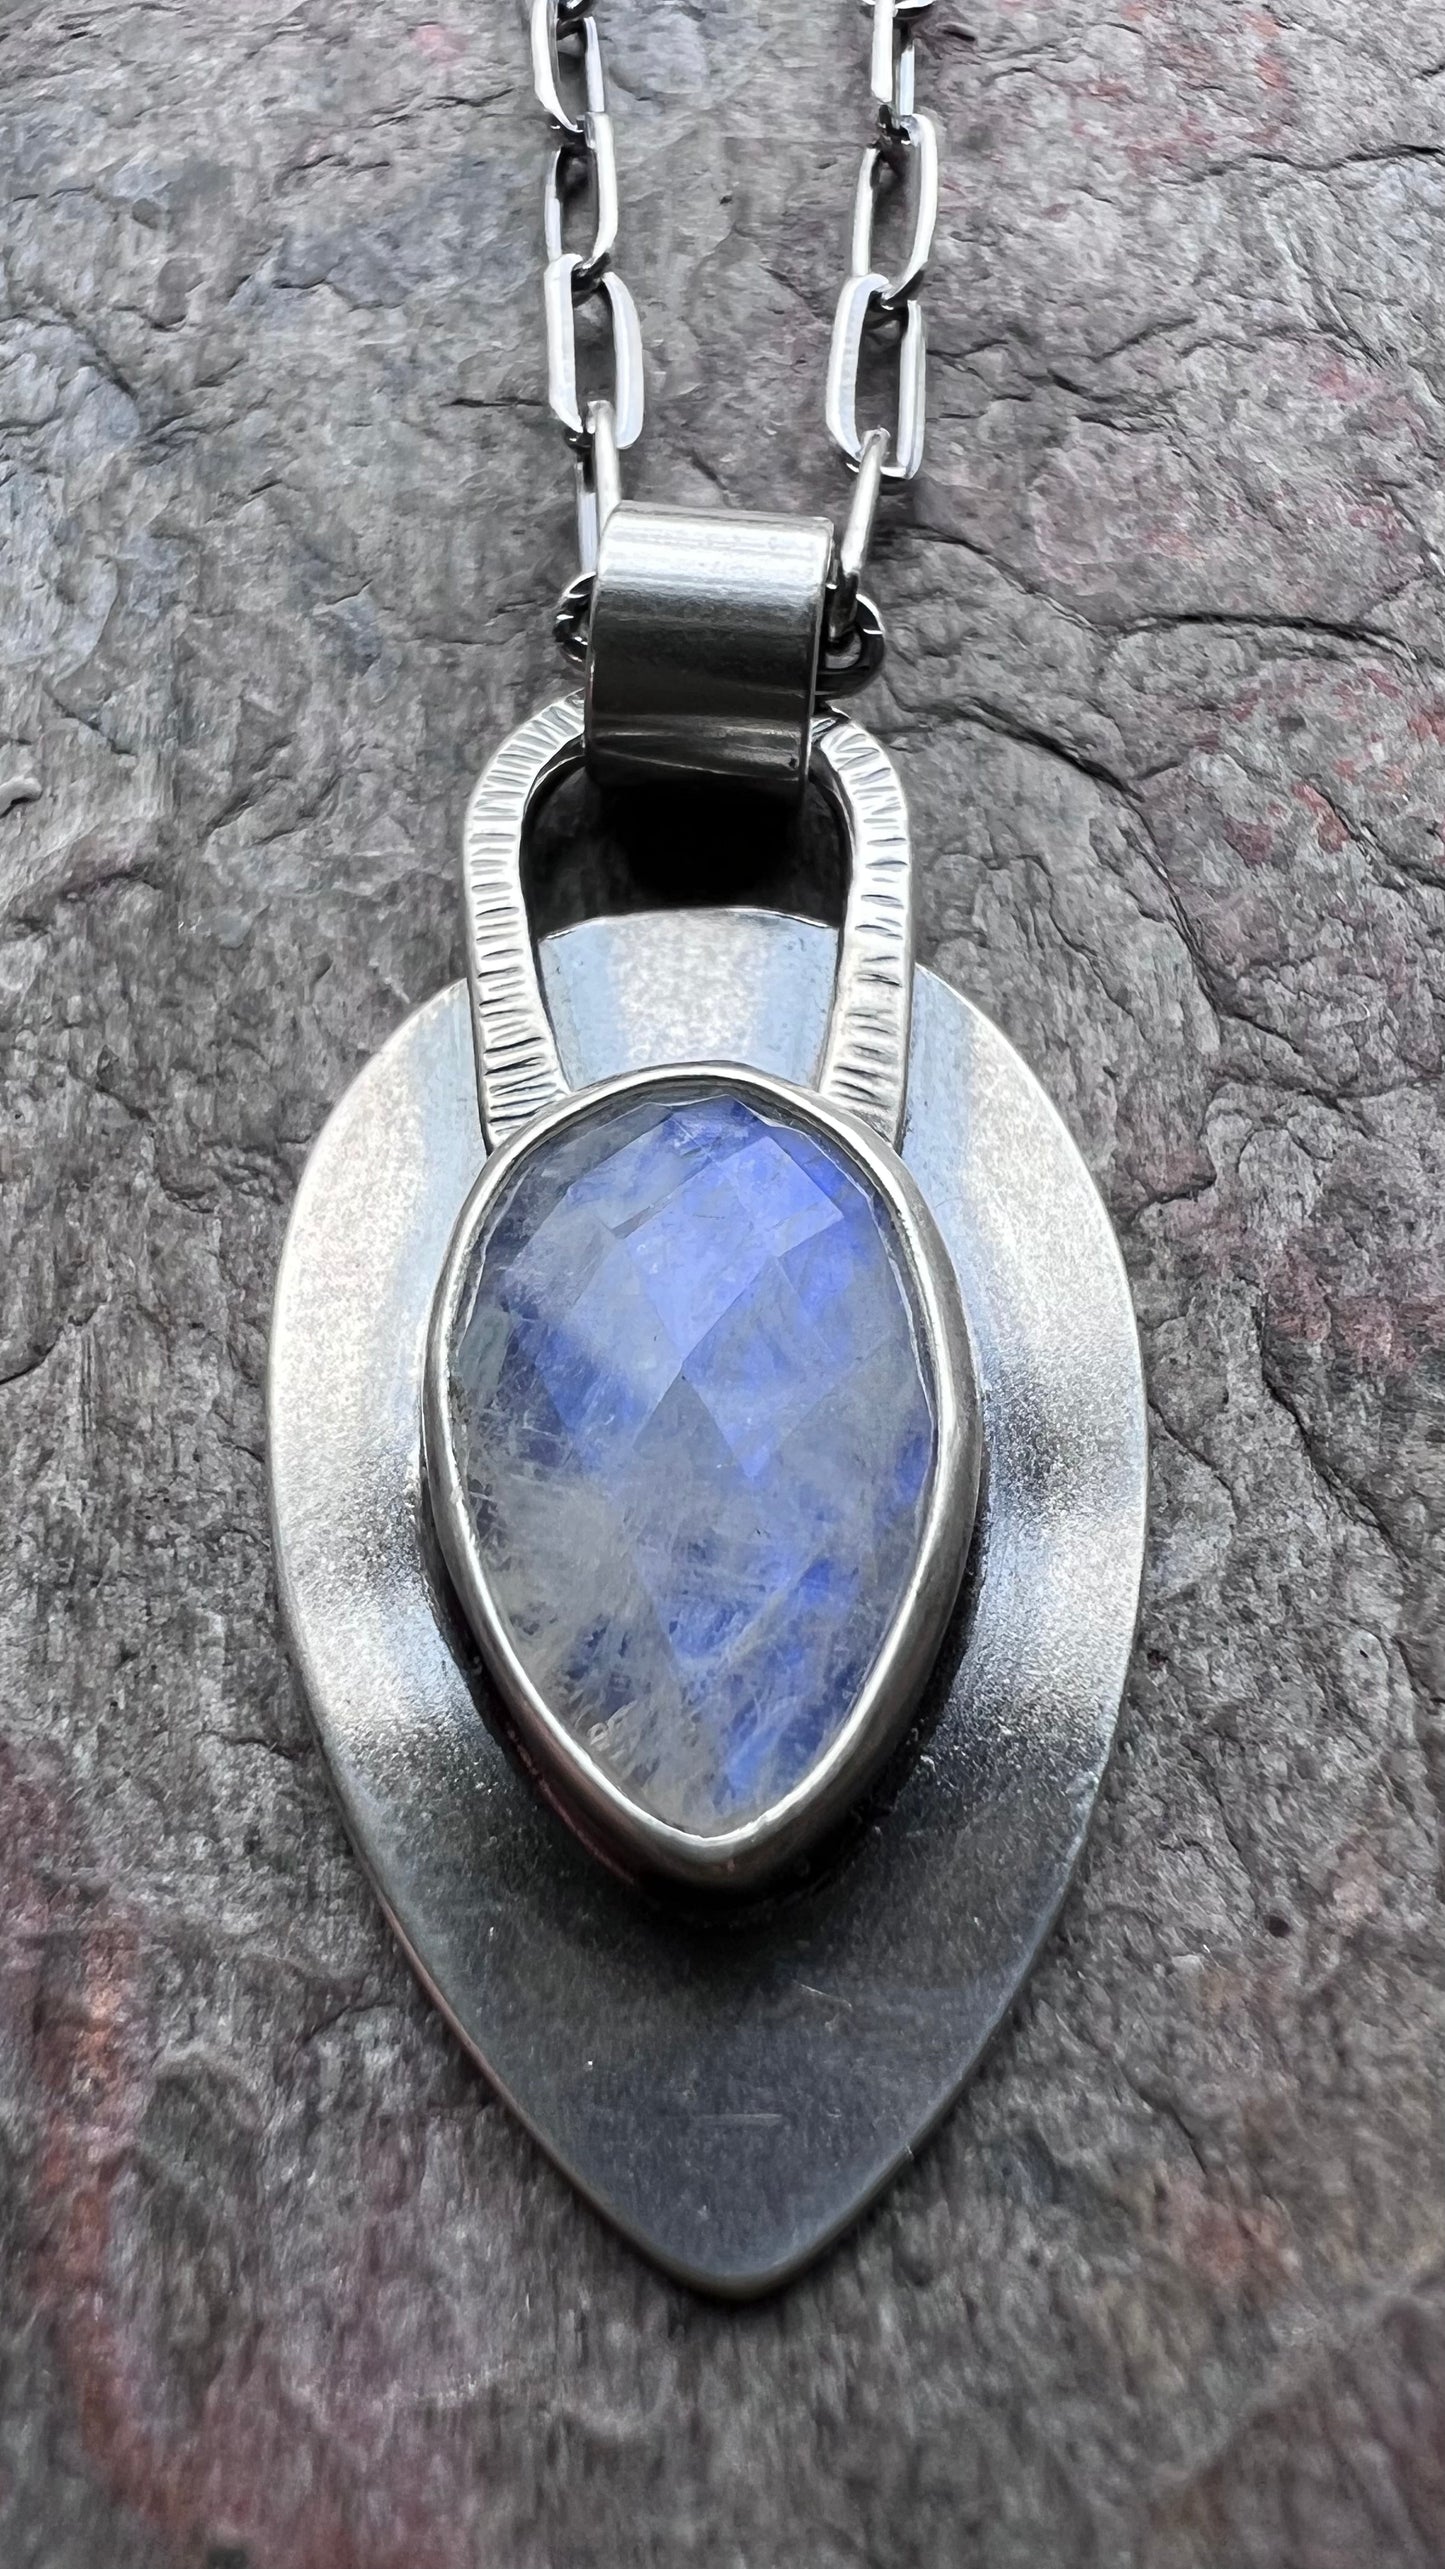 Rainbow Moonstone Sterling Silver Necklace - Handmade One-of-a-kind Pendant on Sterling Silver Chain